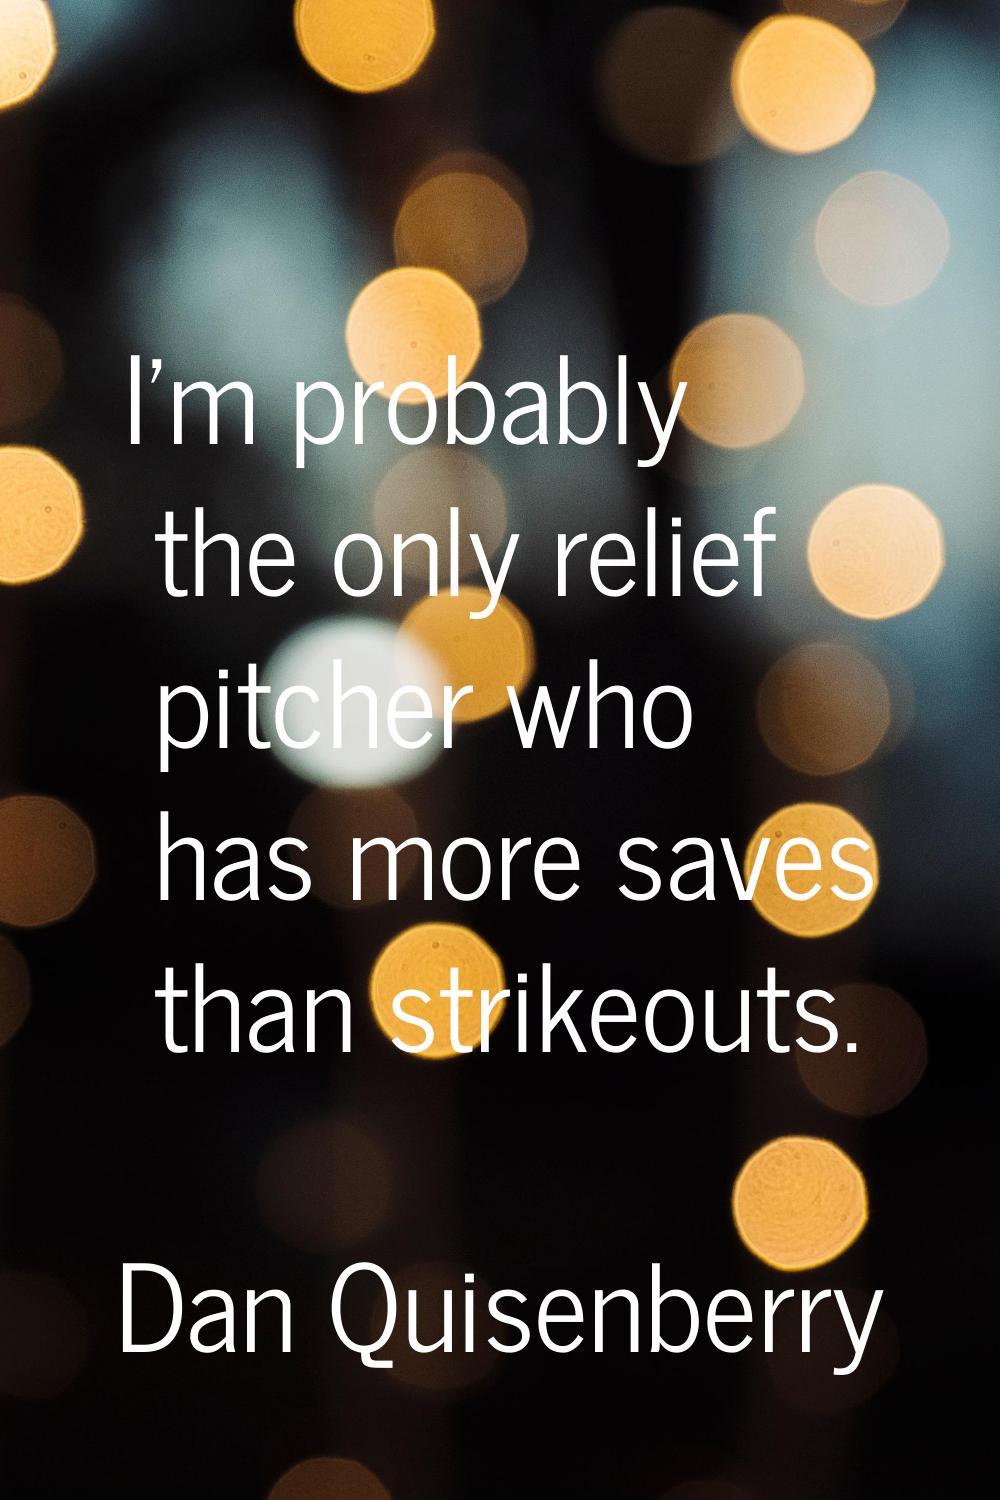 I'm probably the only relief pitcher who has more saves than strikeouts.